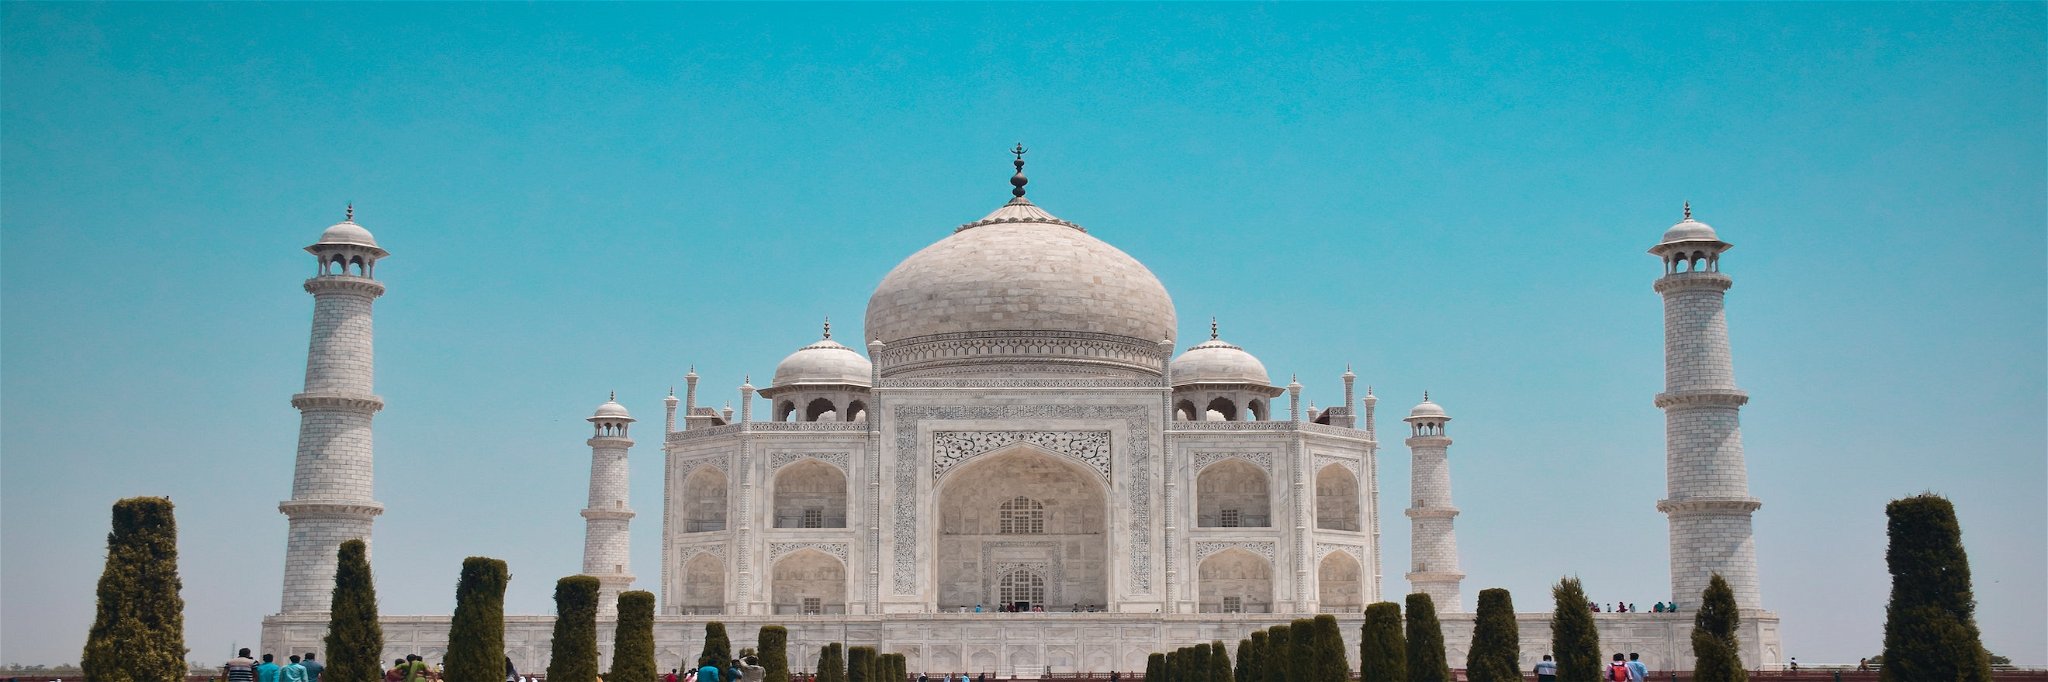 You may be able to&nbsp;visit the&nbsp;Taj Mahal&nbsp;this year